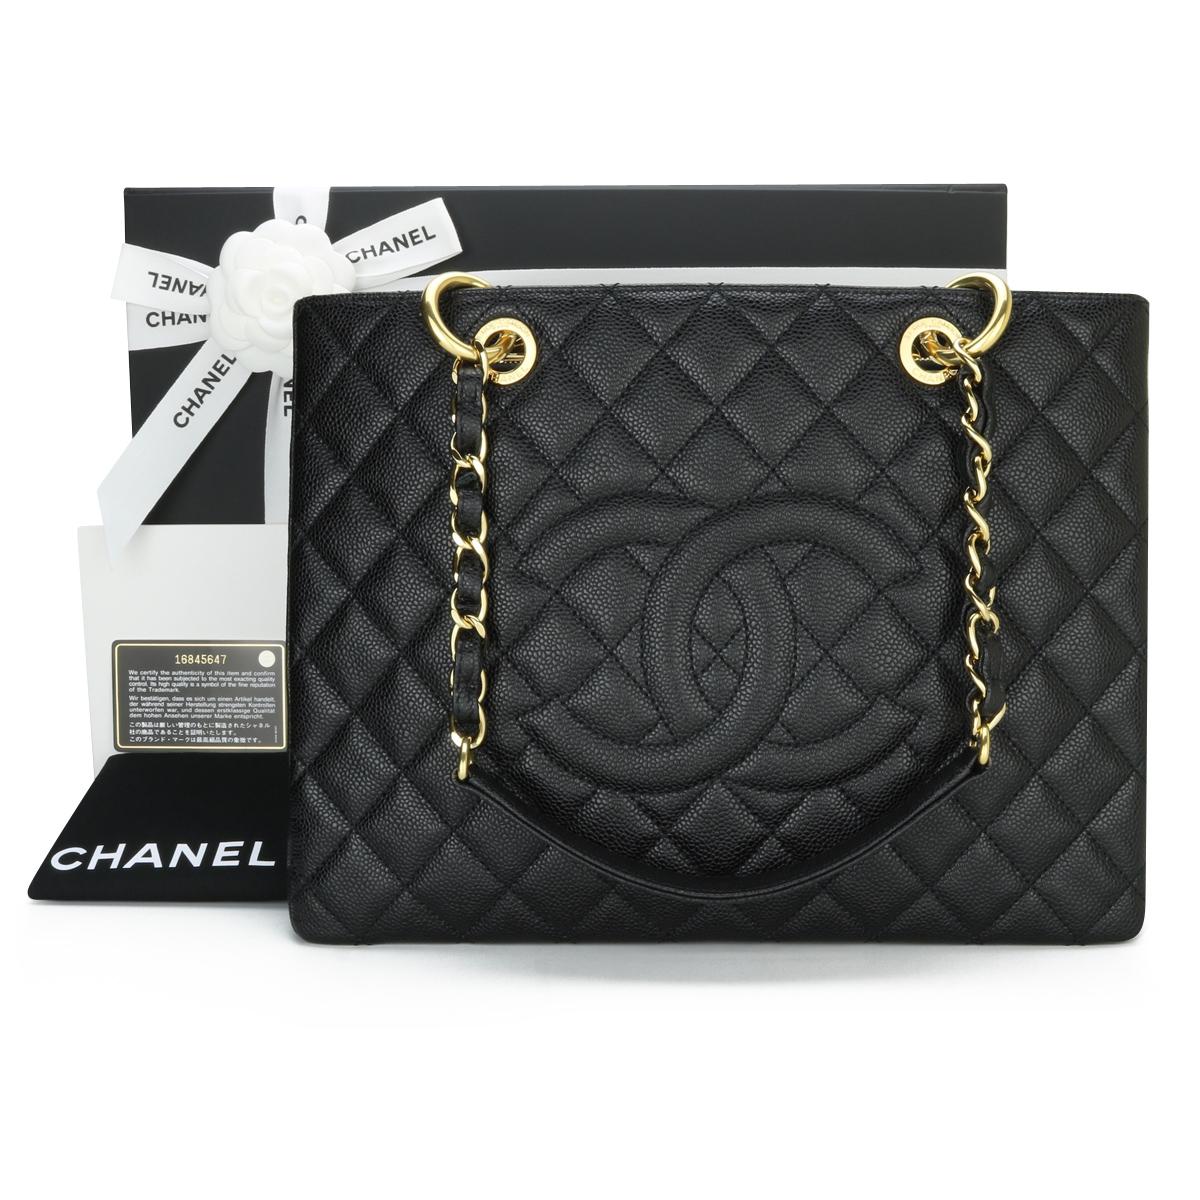 CHANEL Grand Shopping Tote (GST) Black Caviar with Gold Hardware 2012.

This bag is in pristine condition, the bag still holds its original shape, and the hardware is still very shiny.

As Chanel has discontinued the Grand Shopping Tote (GST), it is